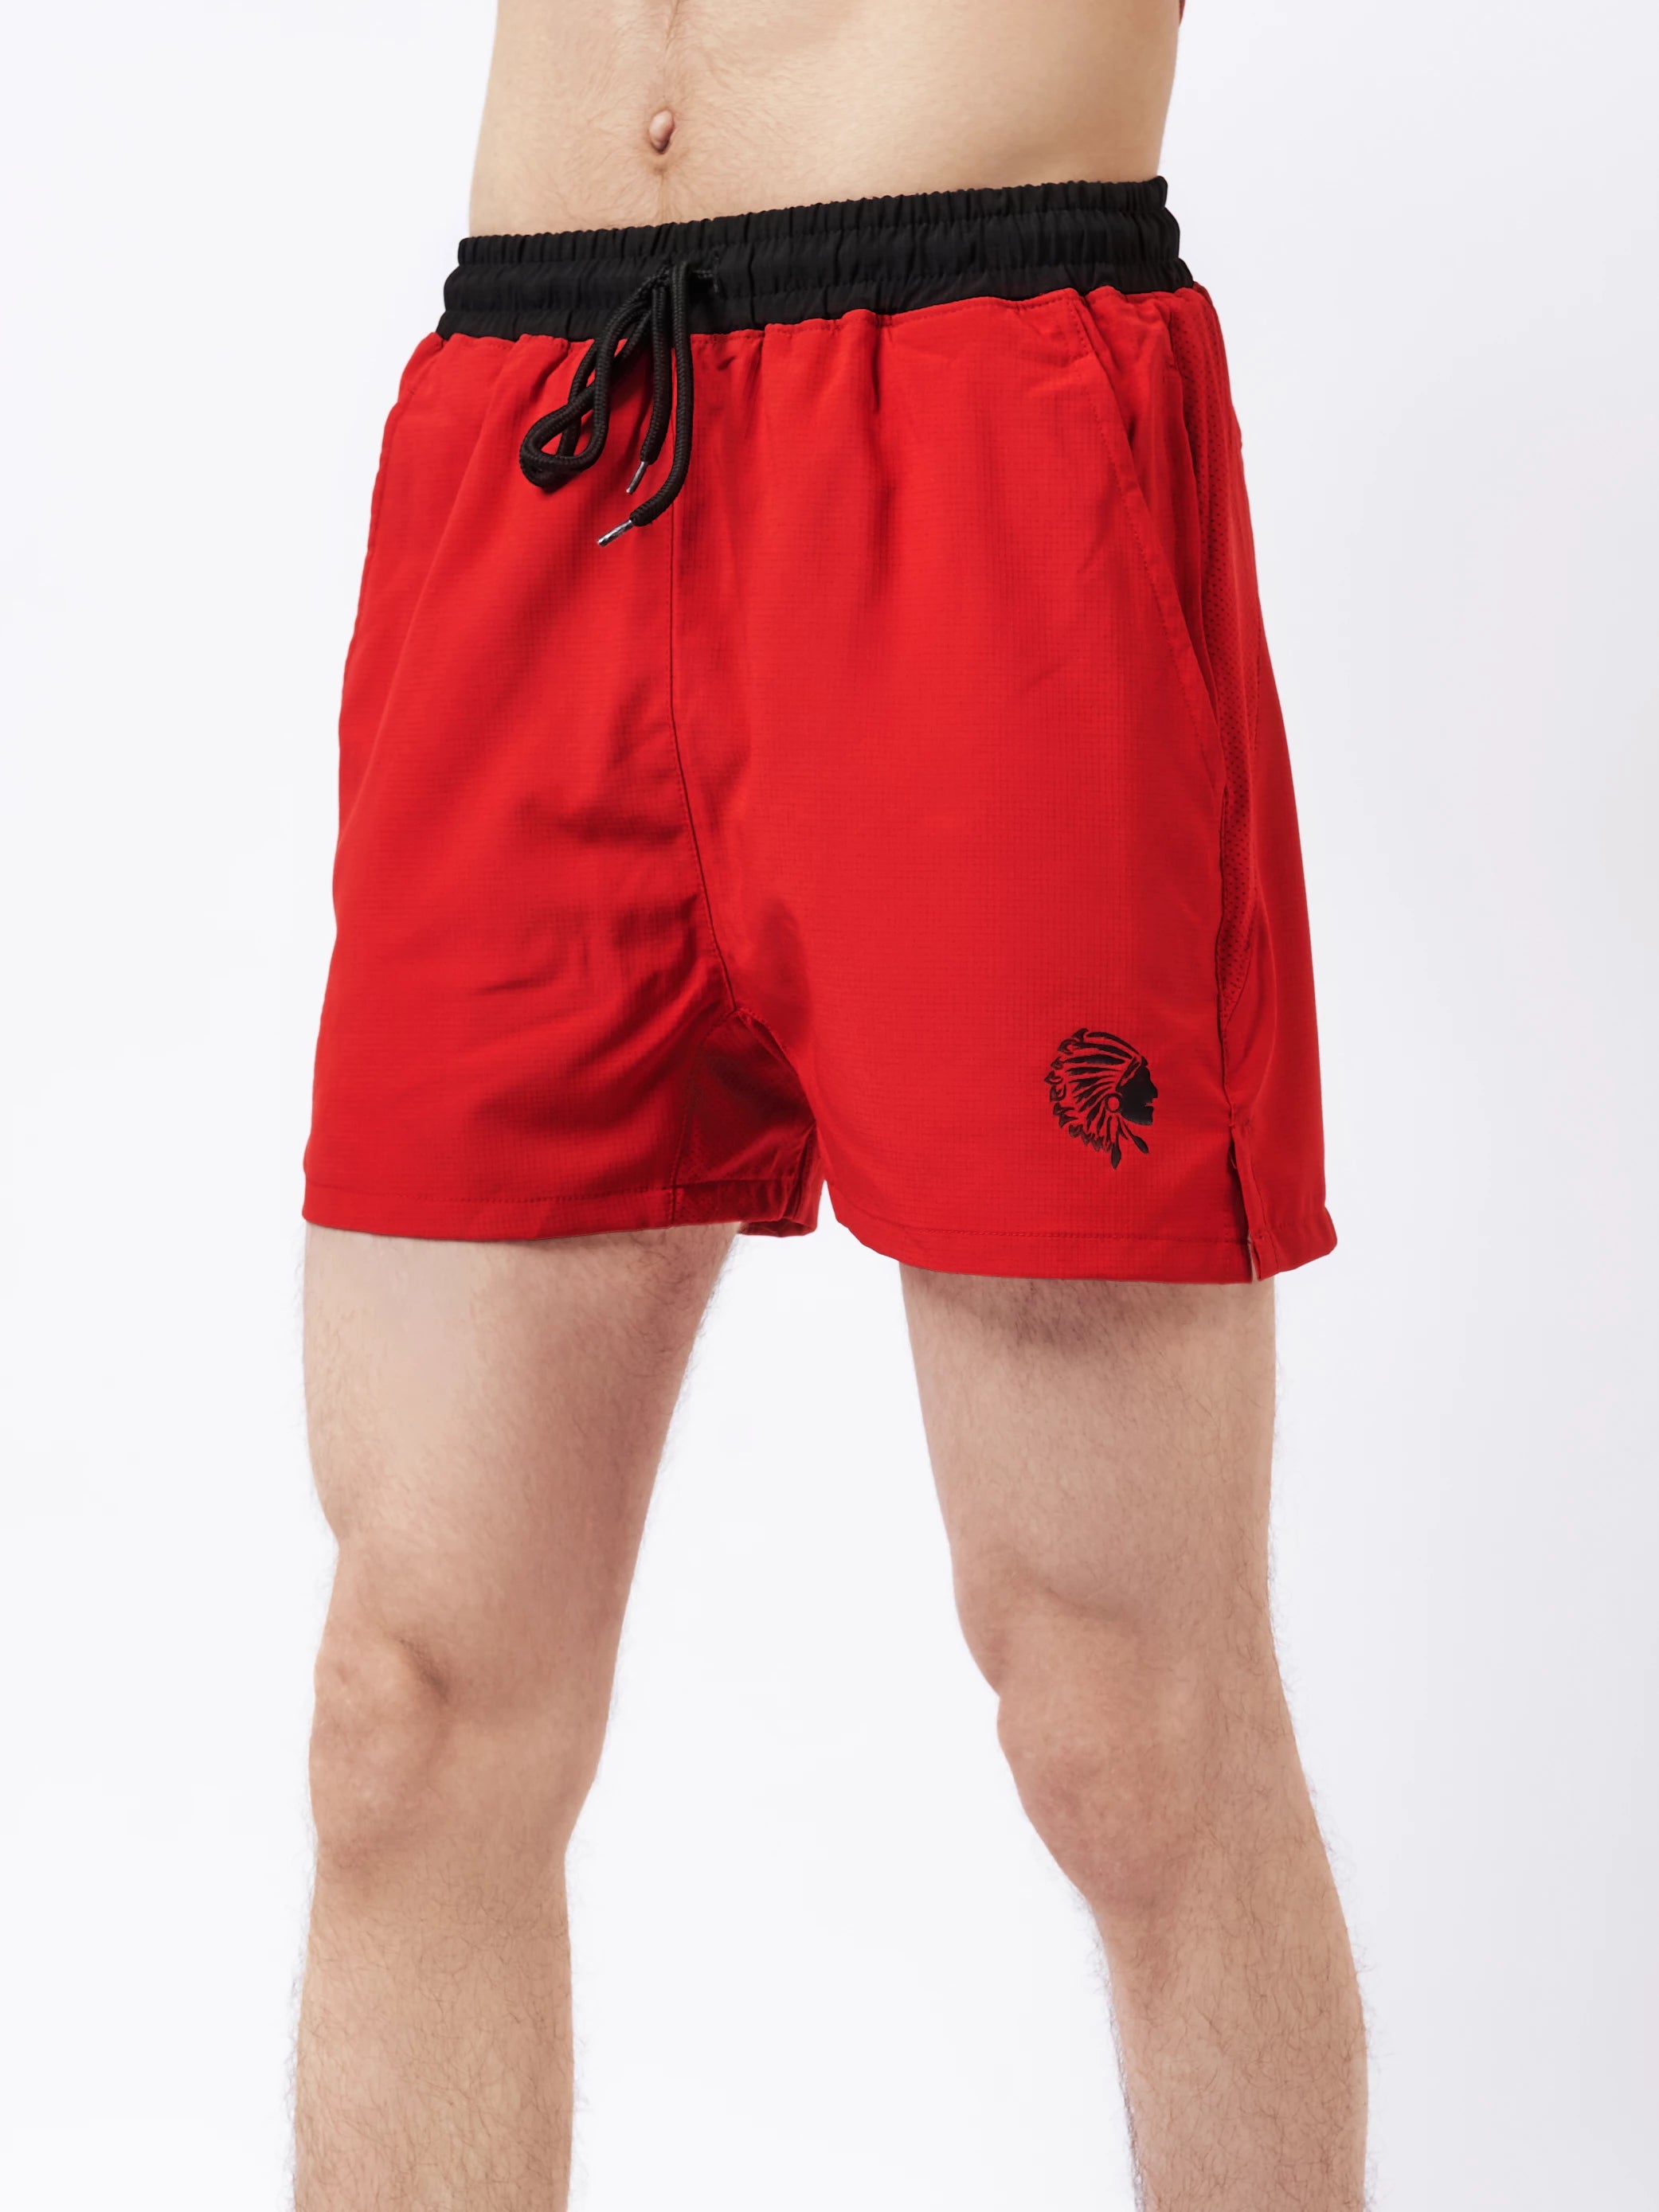 Men's Shorts Red